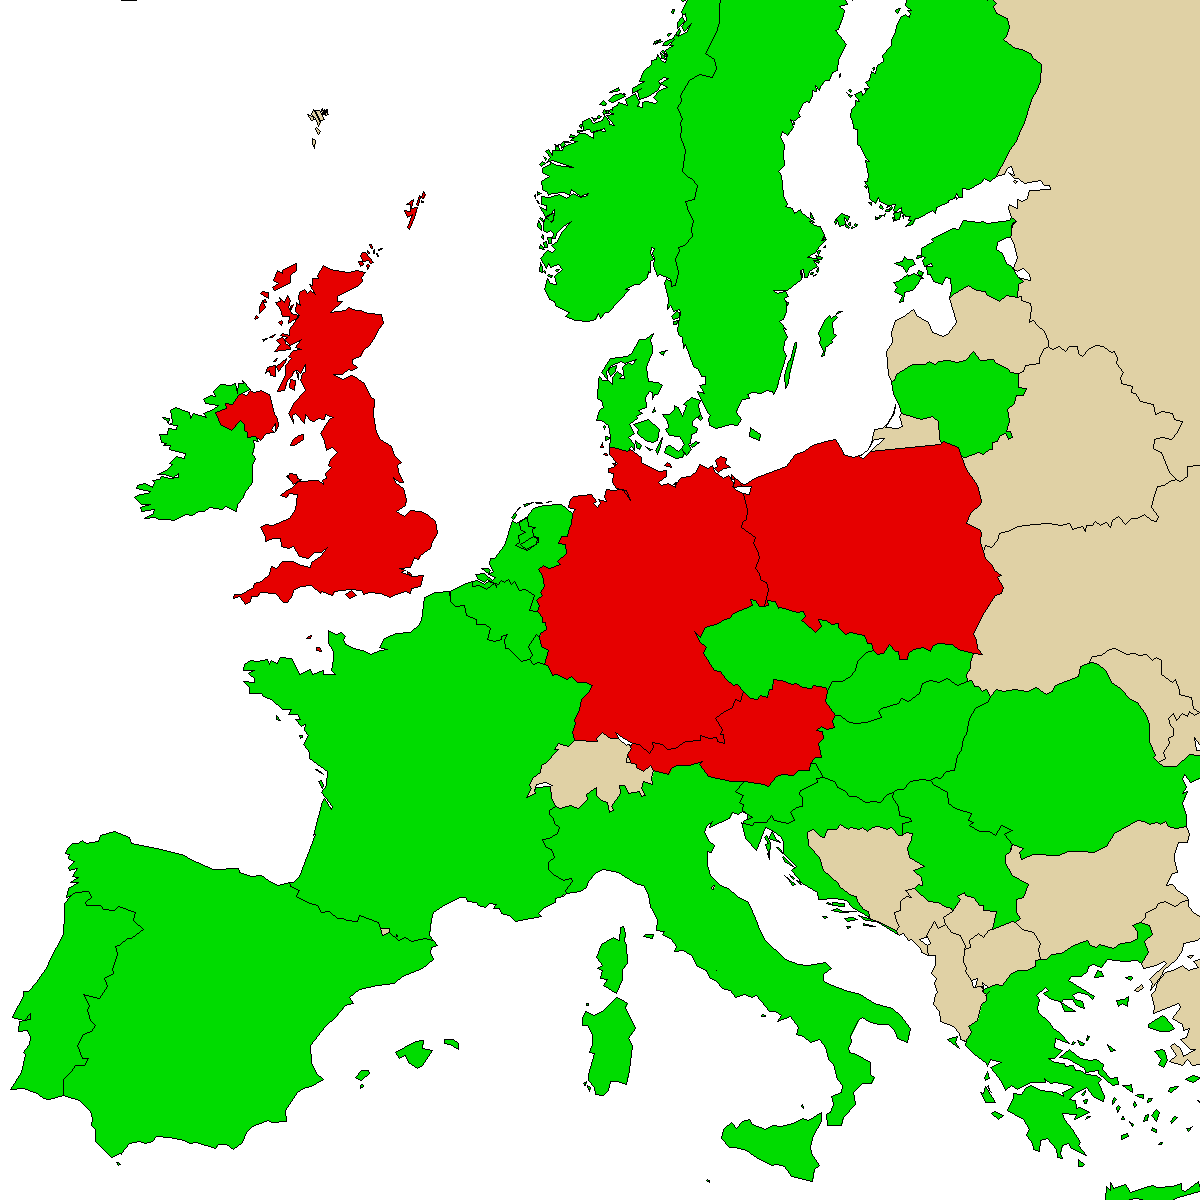 legal info map for our product Mephedrene, green are countries with no ban, red with ban, gray is unknown